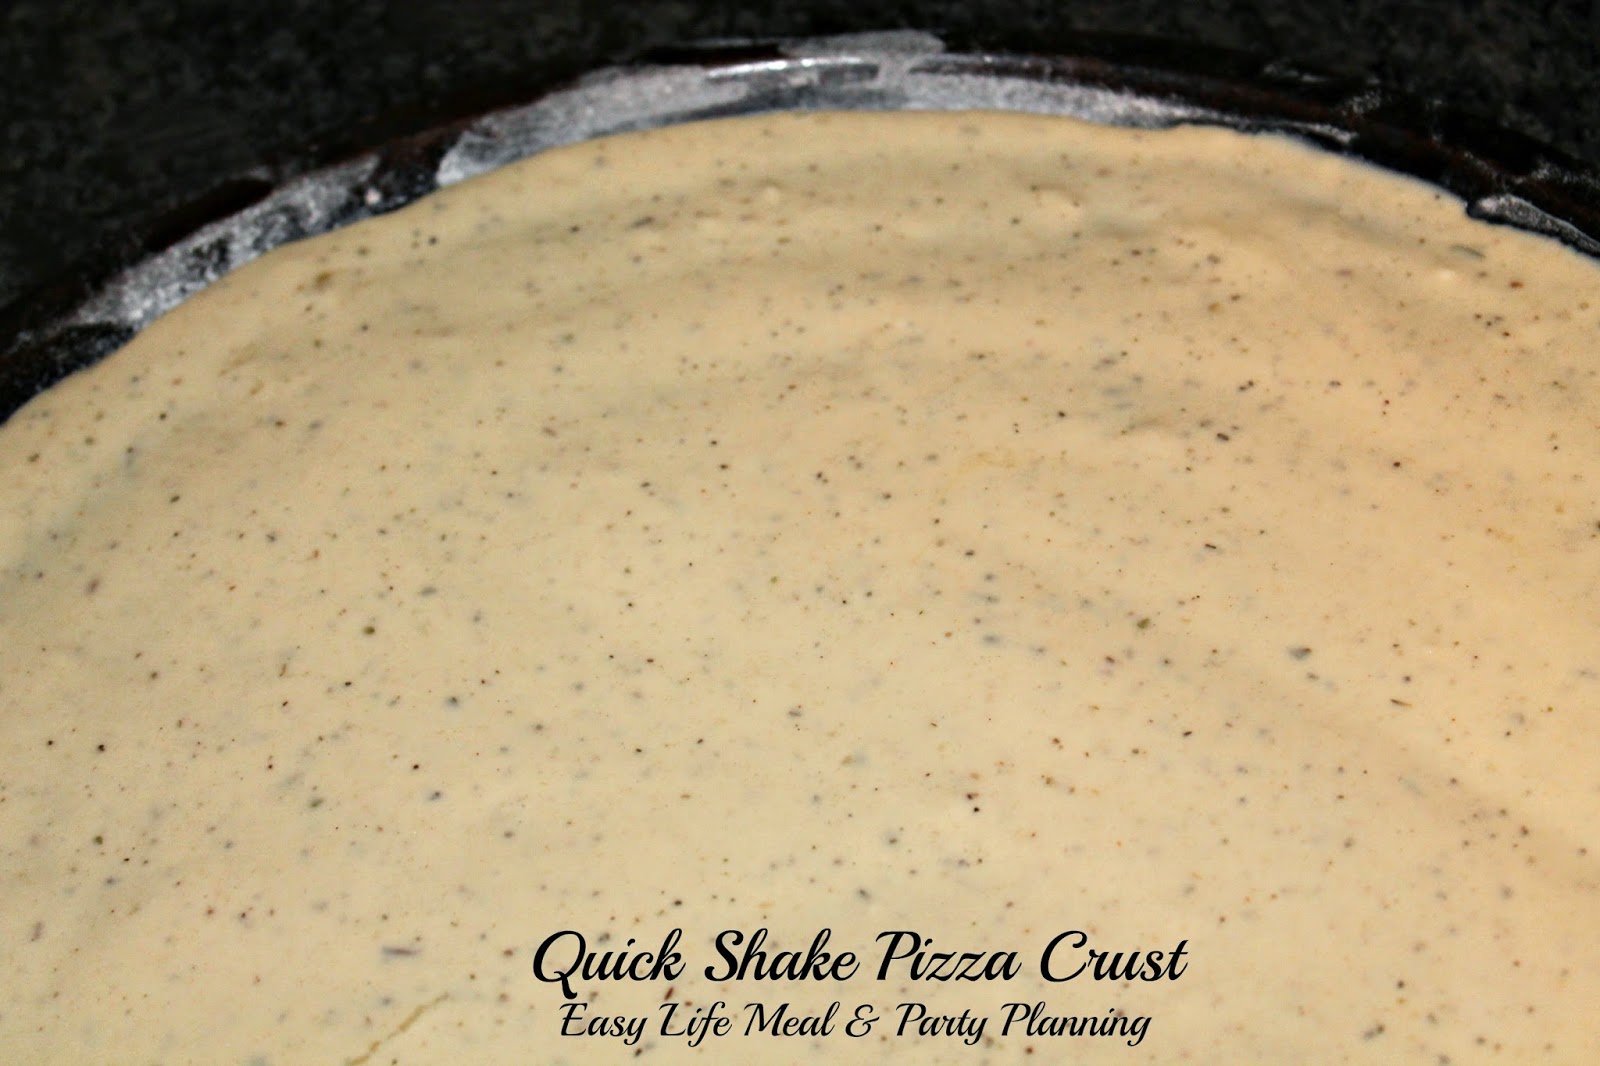 Easy Life Meal & Party Planning: Quick & Easy Pizza Crust - 3 minutes to prepare - no rising, no kneading, and no rolling & amazing!